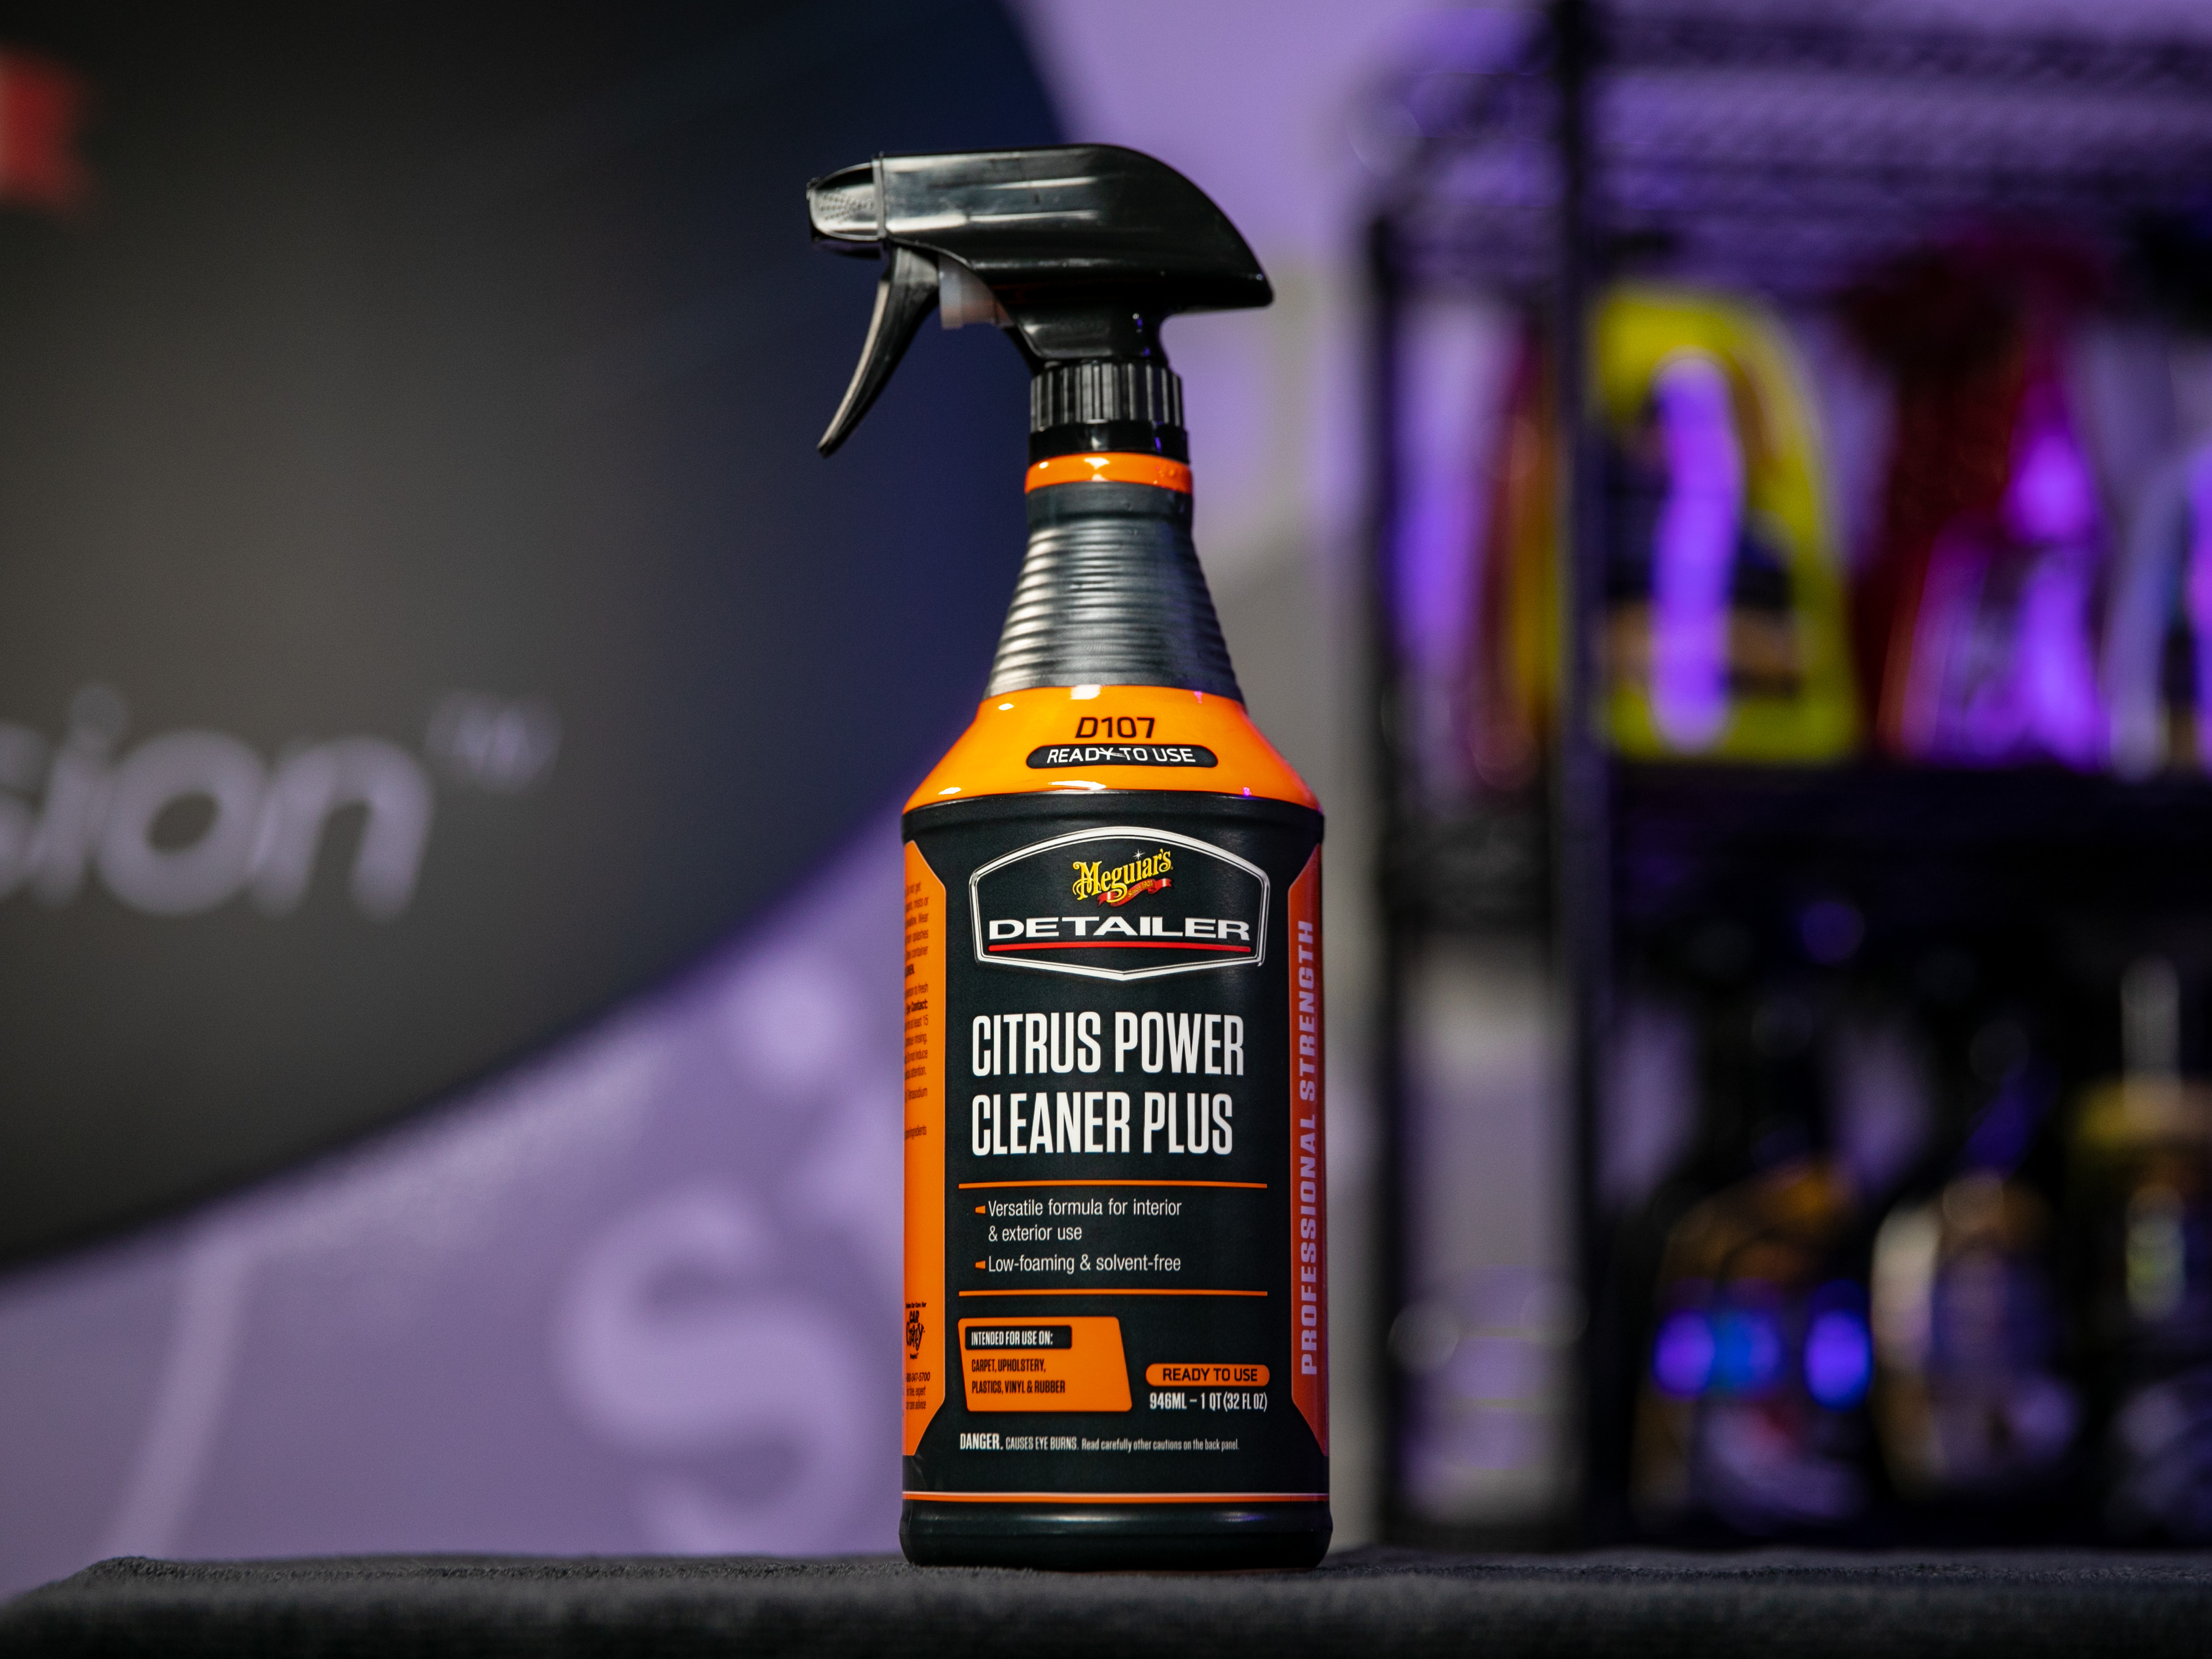 Meguiars™ All Purpose Cleaner 